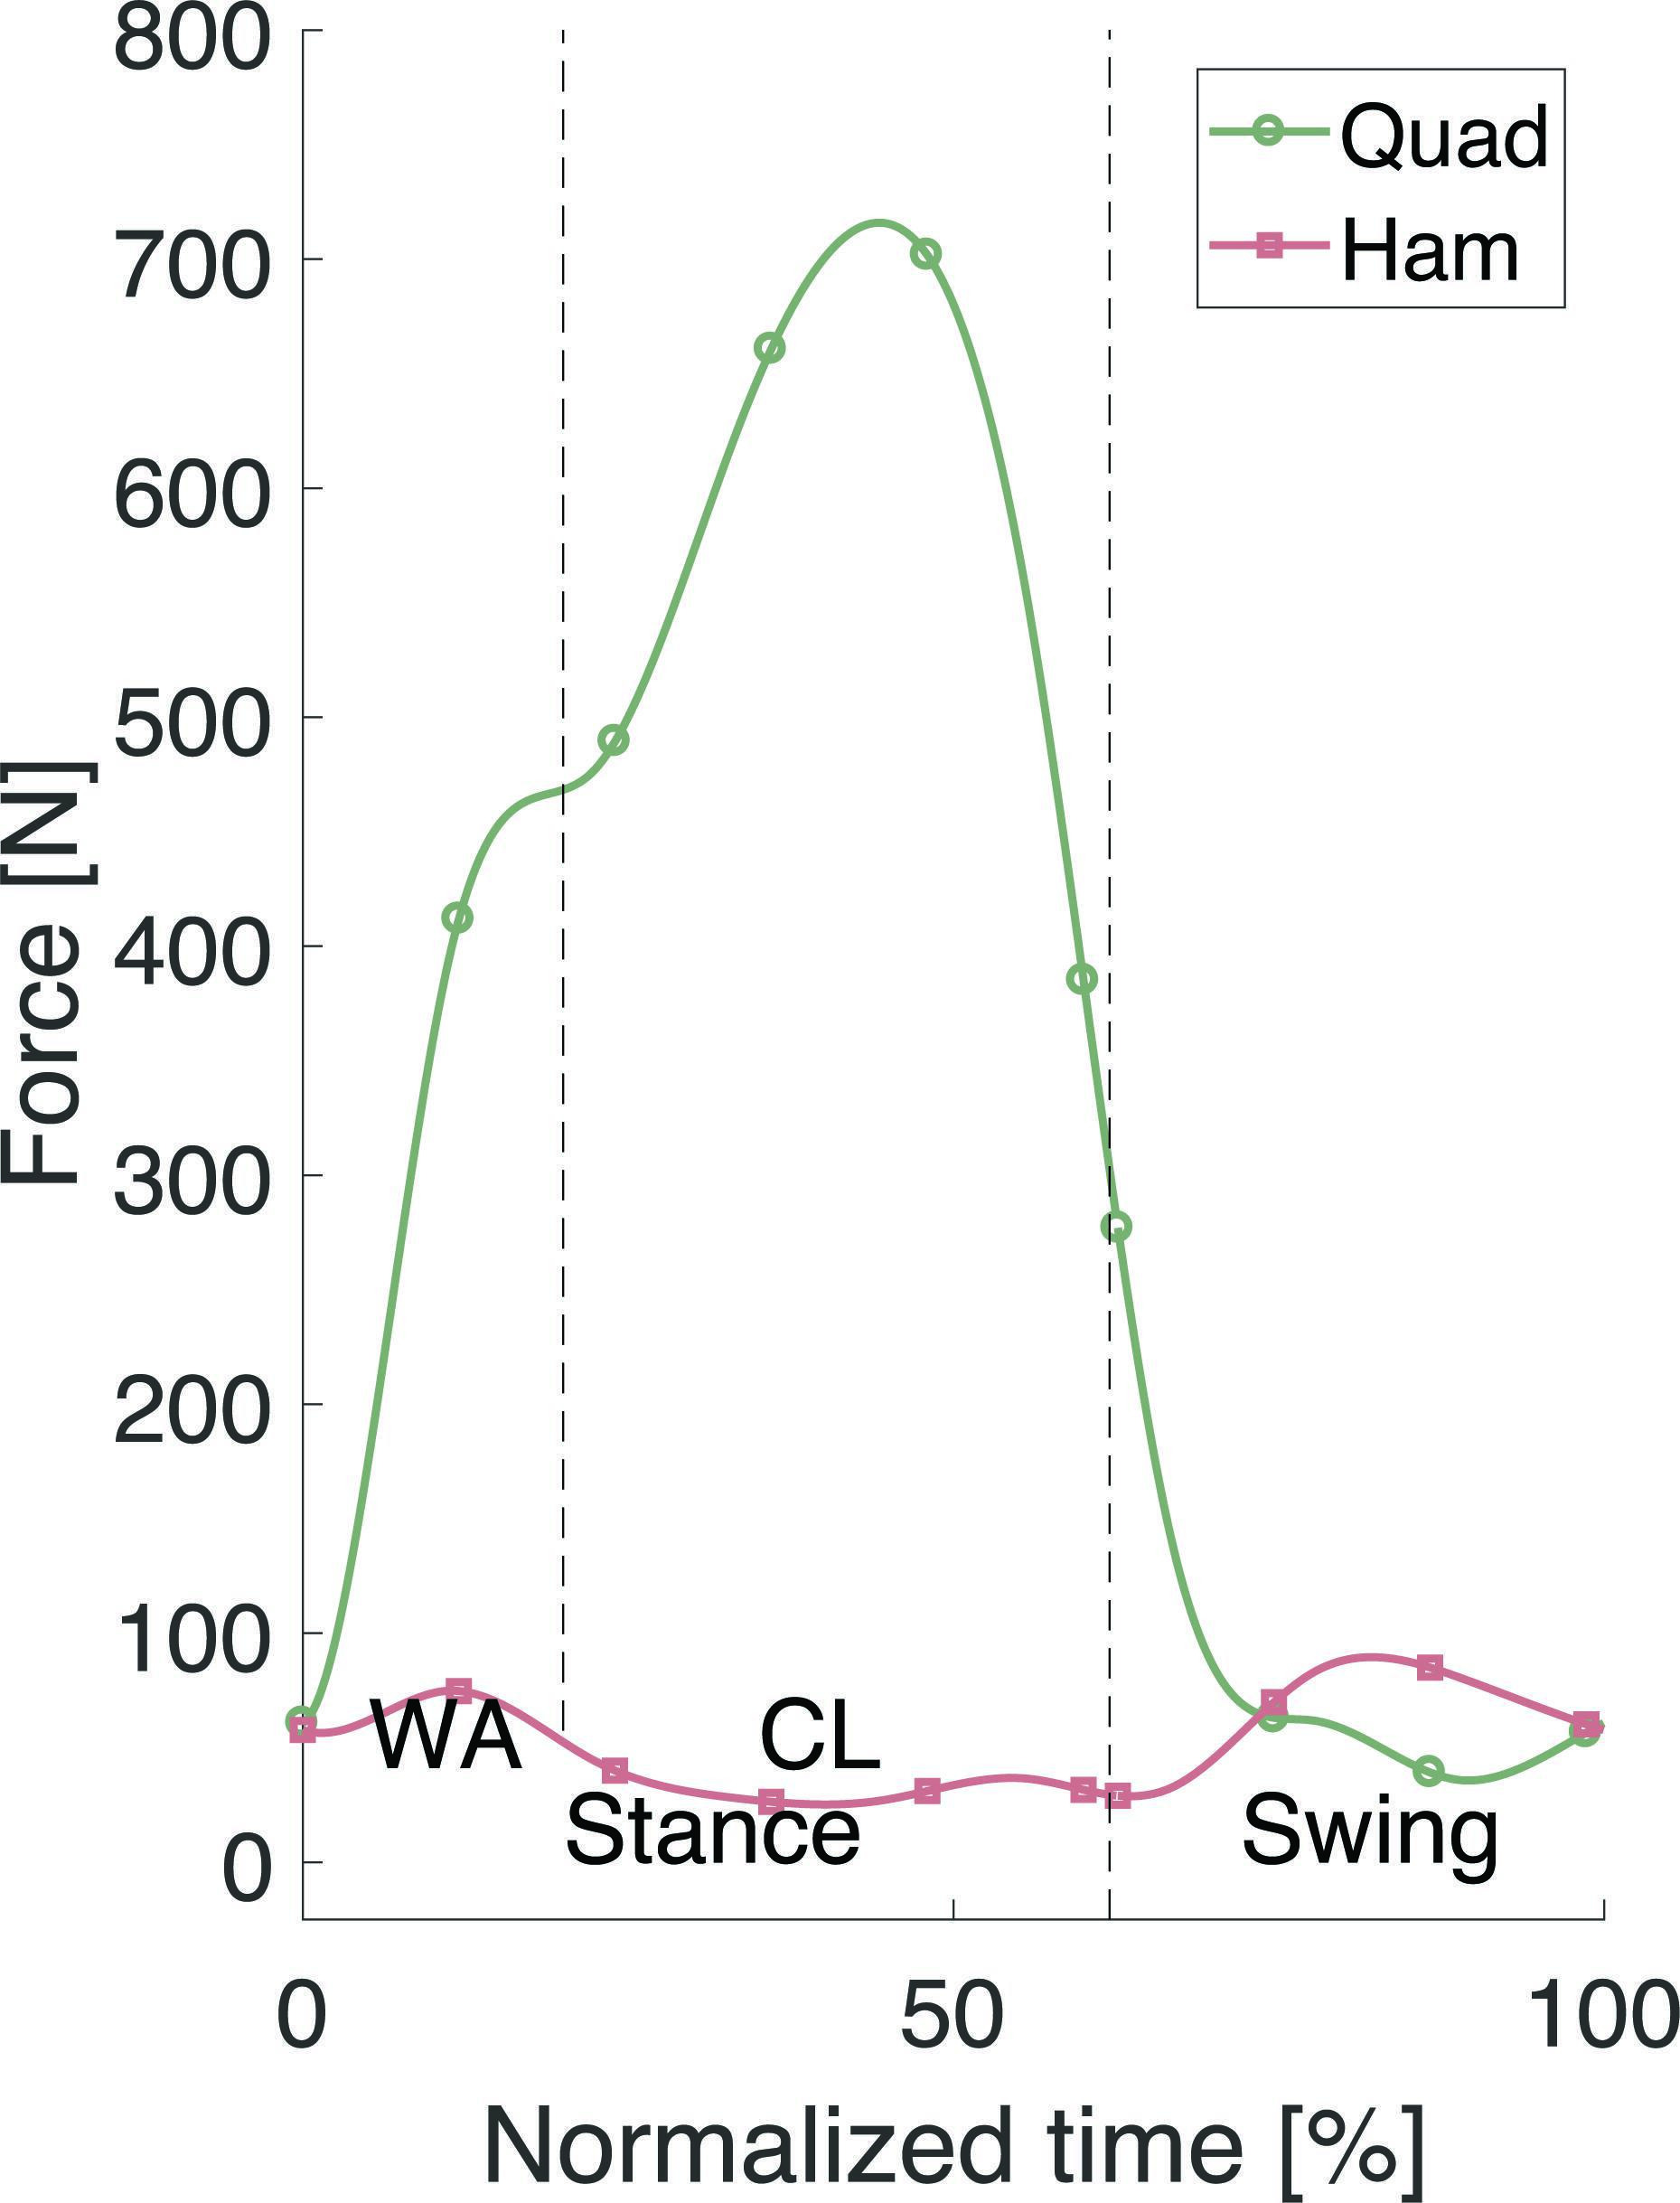 Fig. 3 
            The applied quadriceps (Quad) and hamstring (Ham) forces during the stair descent cycle. CL, controlled lowering phase; WA, weight acceptance phase.
          